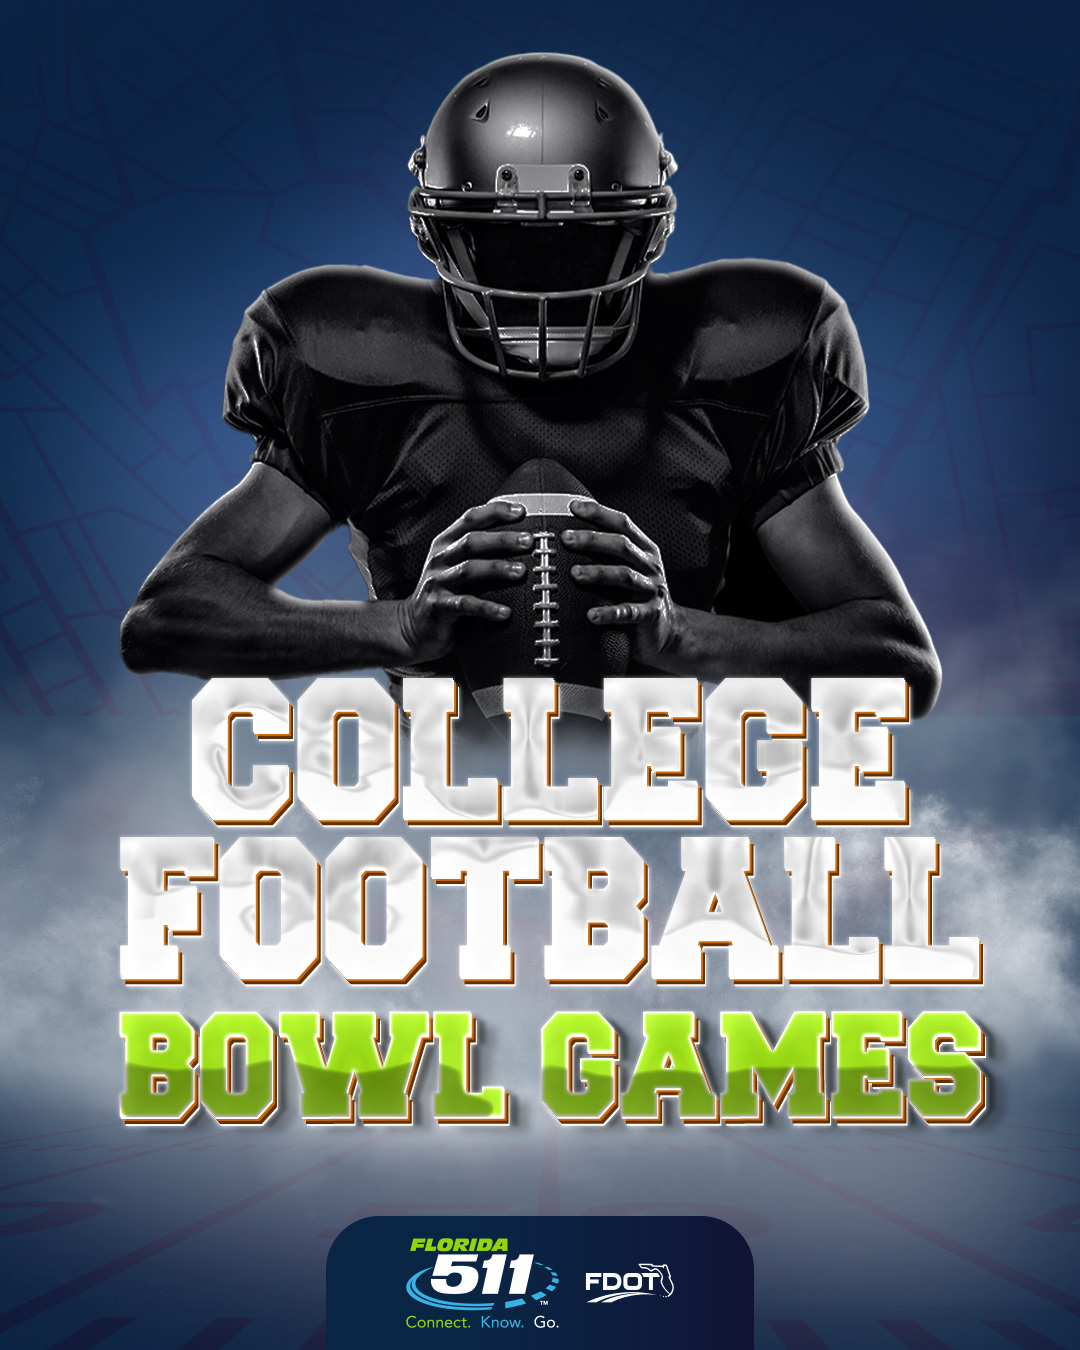 Use FL511 for College Football Bowl Games